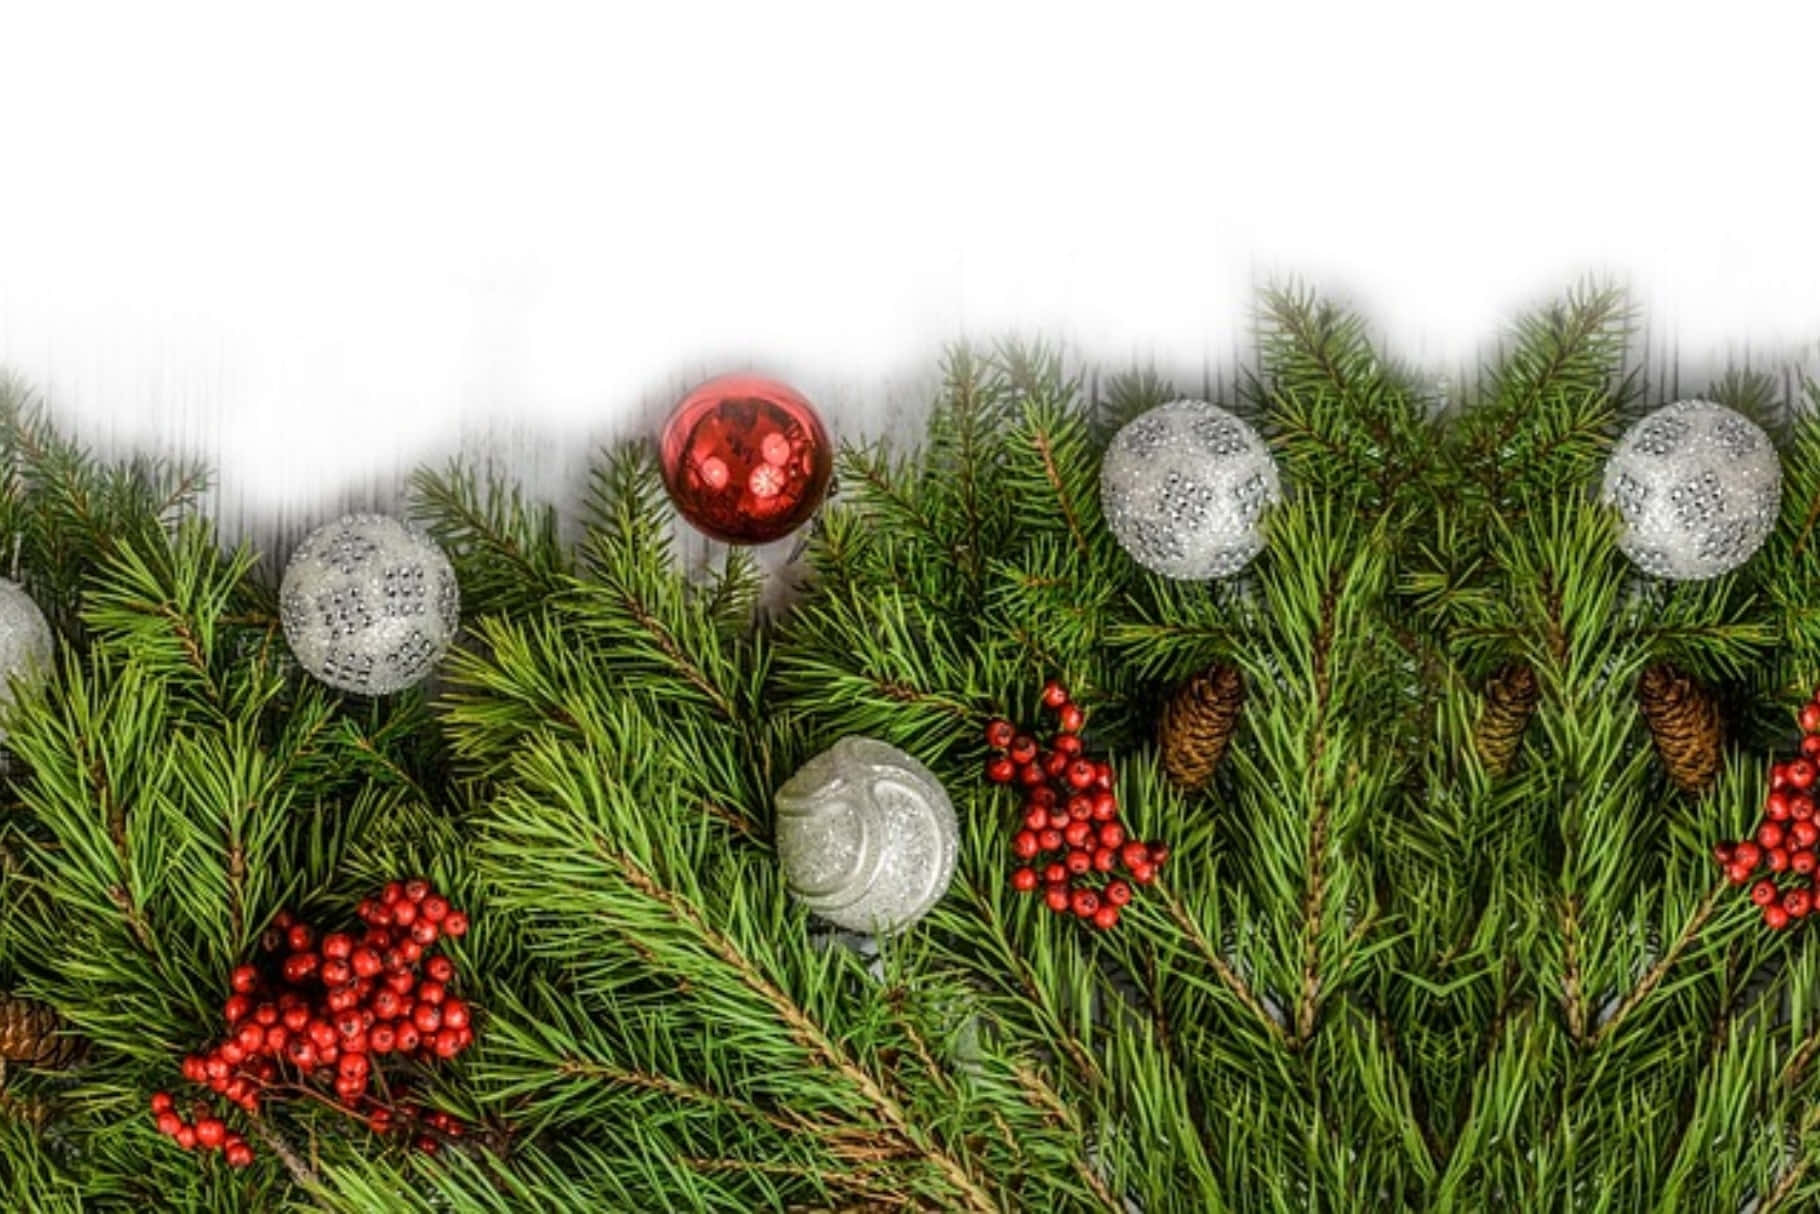 “The perfect Christmas ornament to decorate your home” Wallpaper